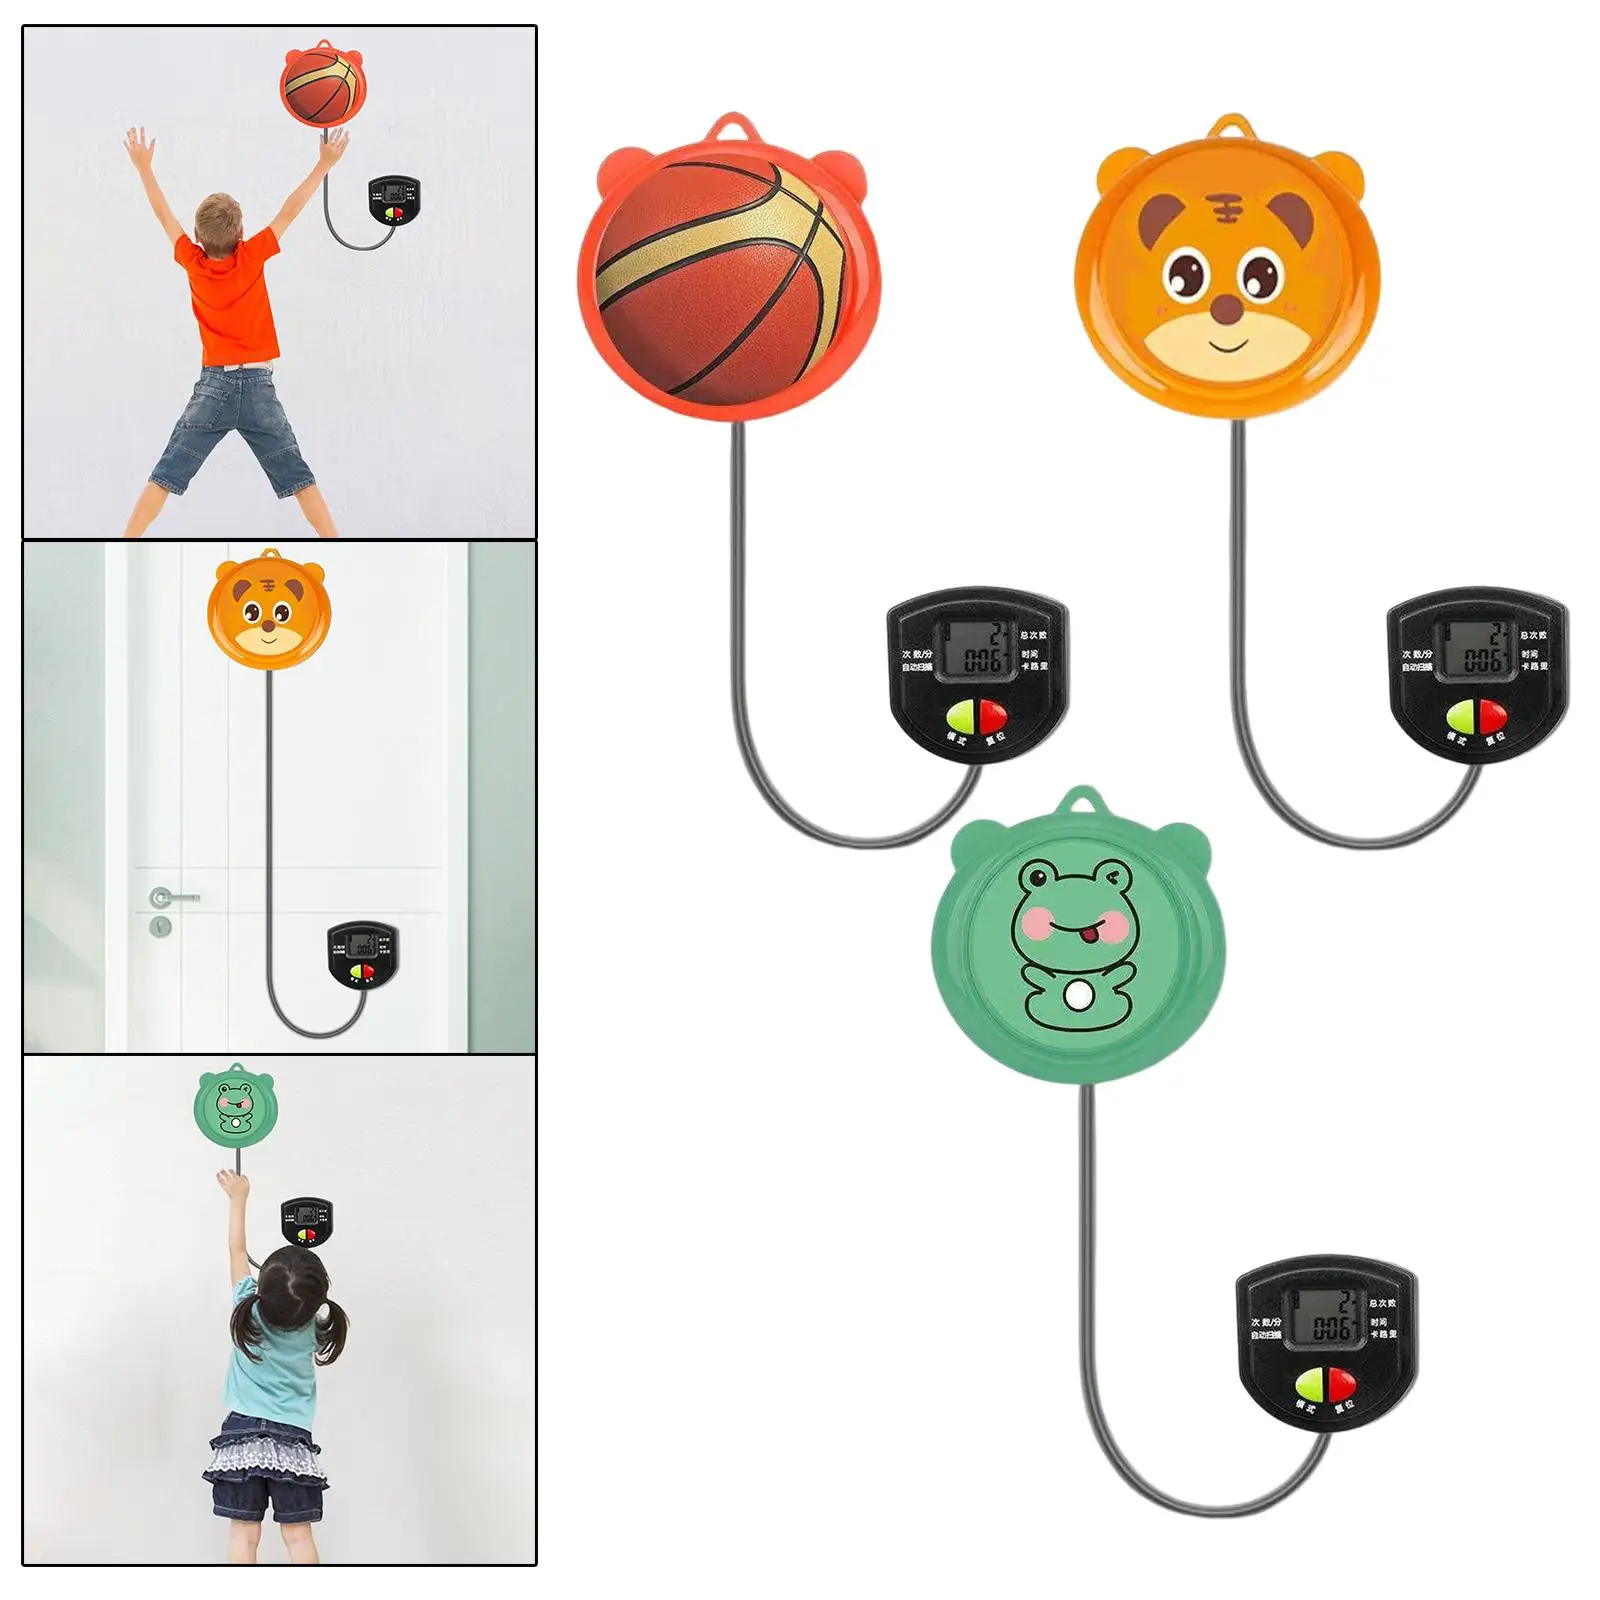 Jump Training Kids Equipment Jump High Assistant Touch Jump High Counter for Home Exercise Children Kids Bounce Training